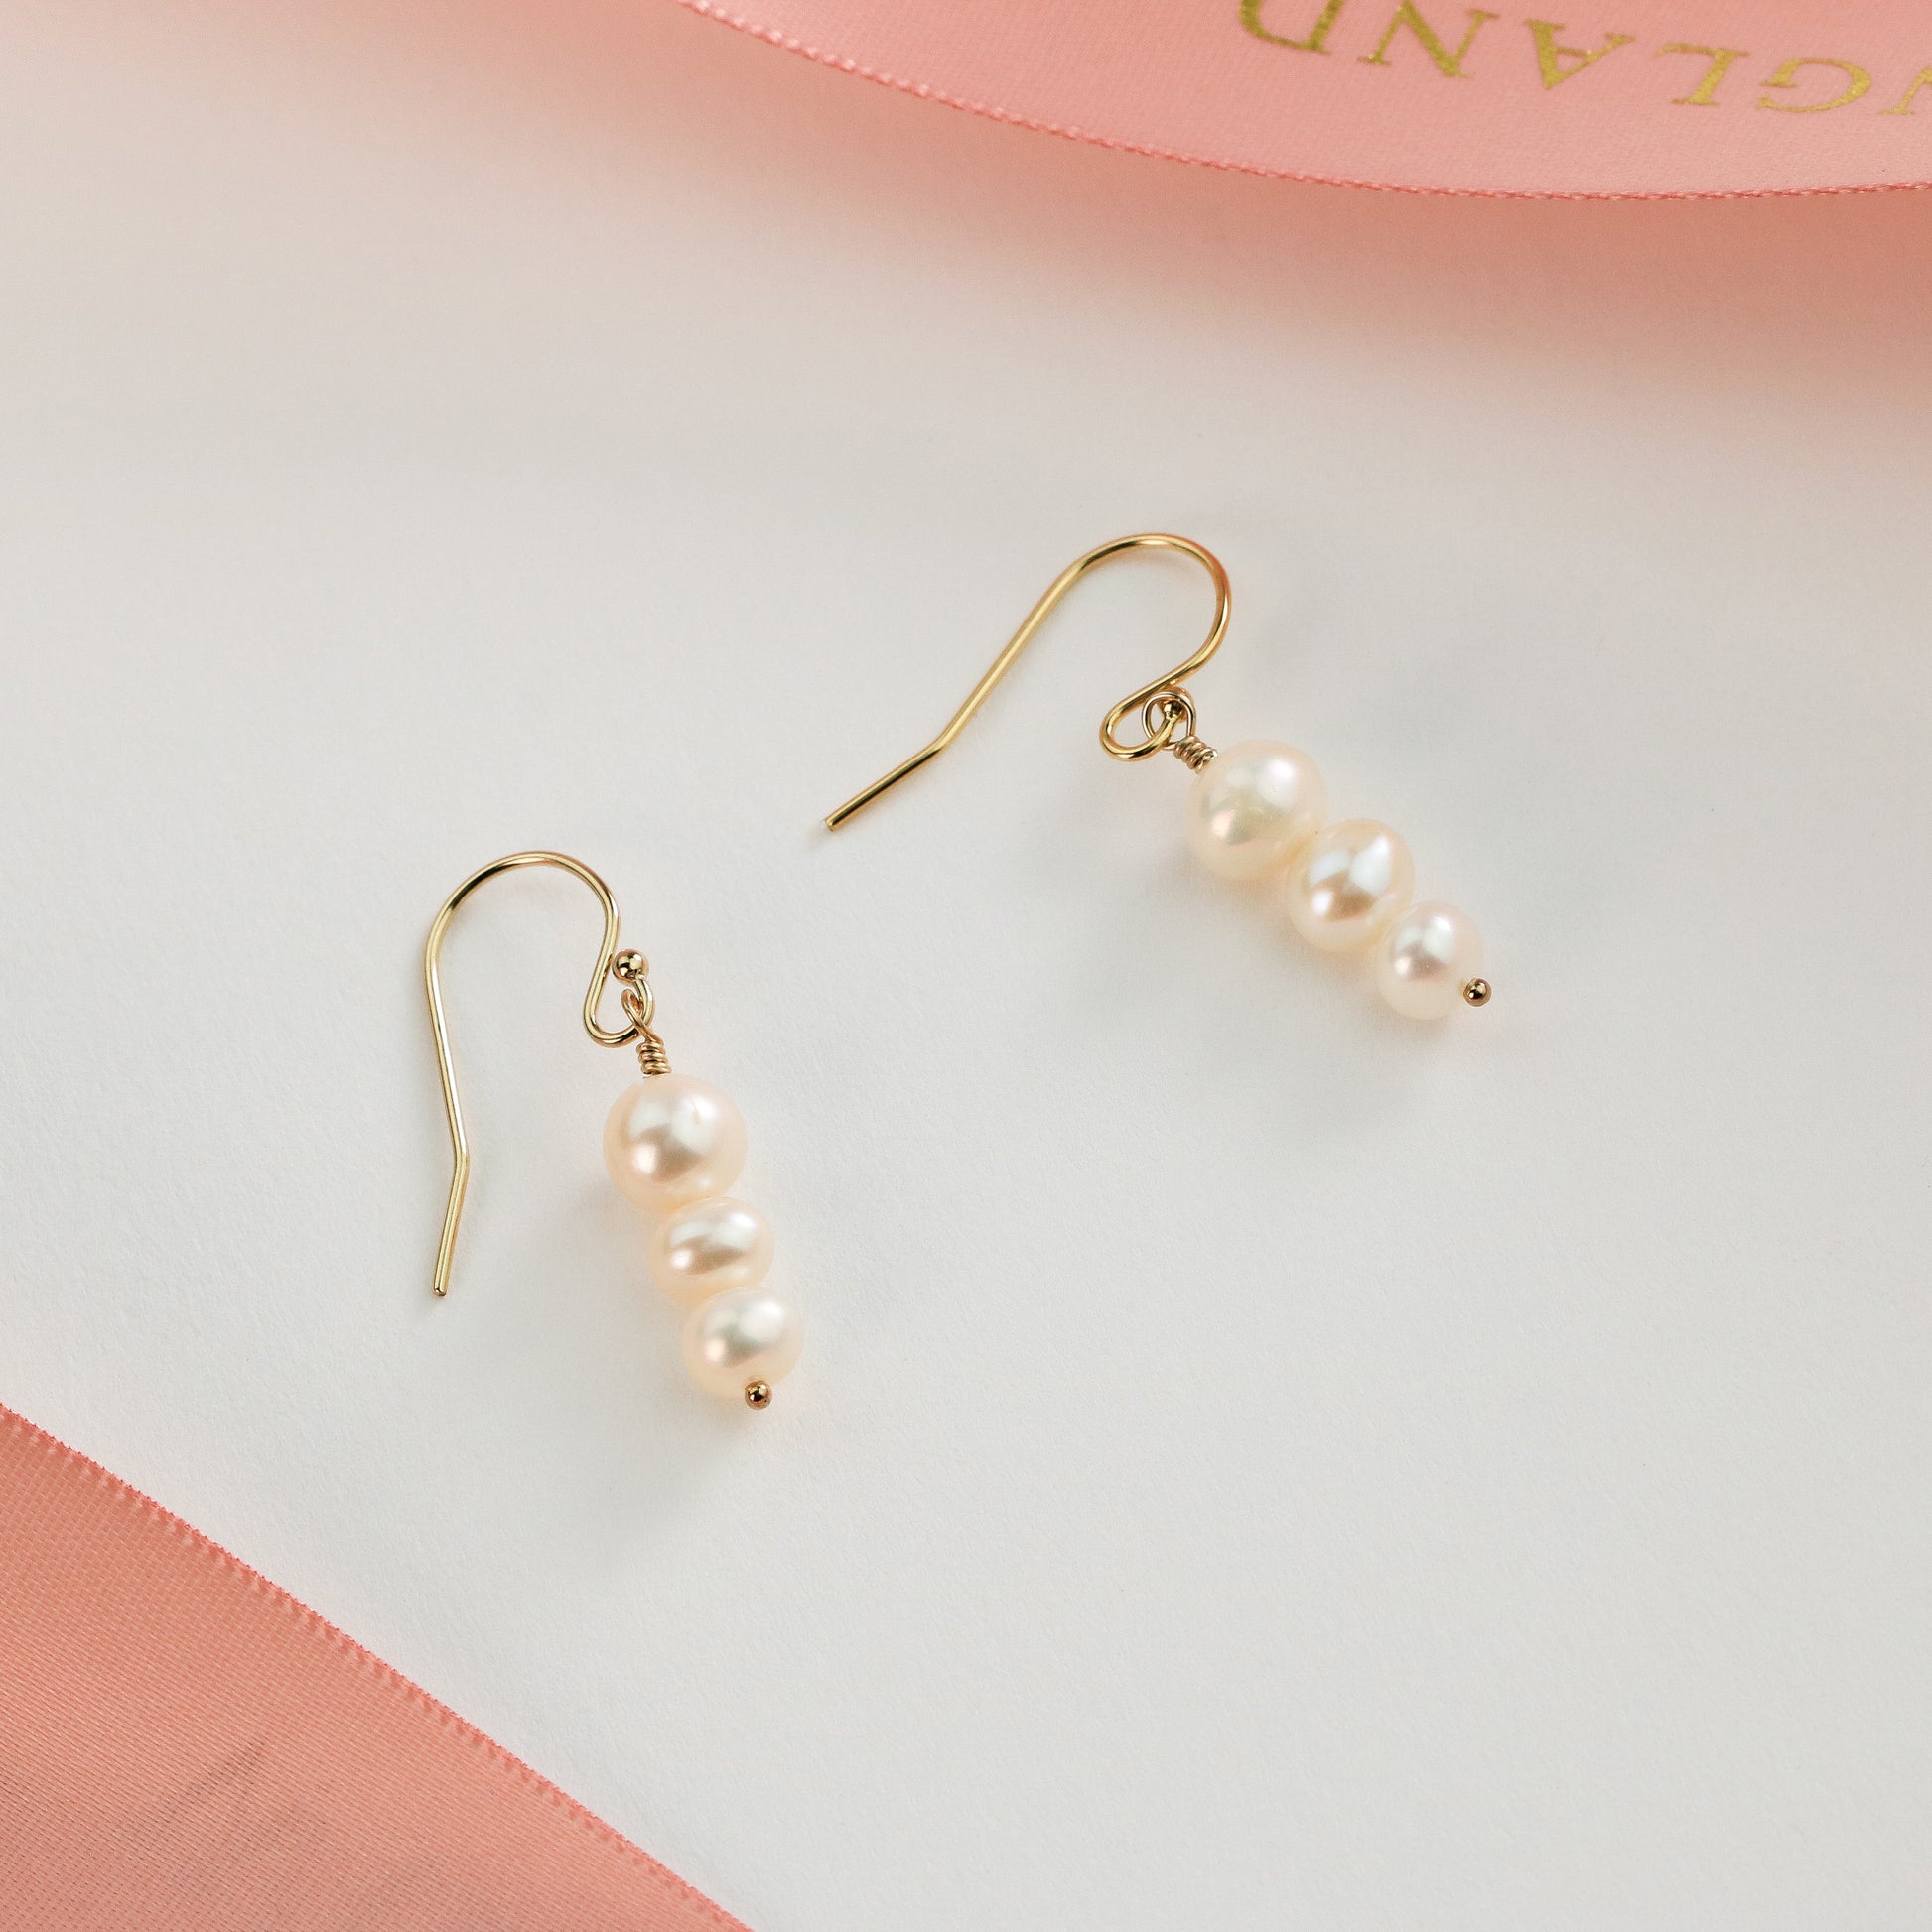 30th Birthday Earrings - 3 Pearls for 3 Decades - Silver & Gold